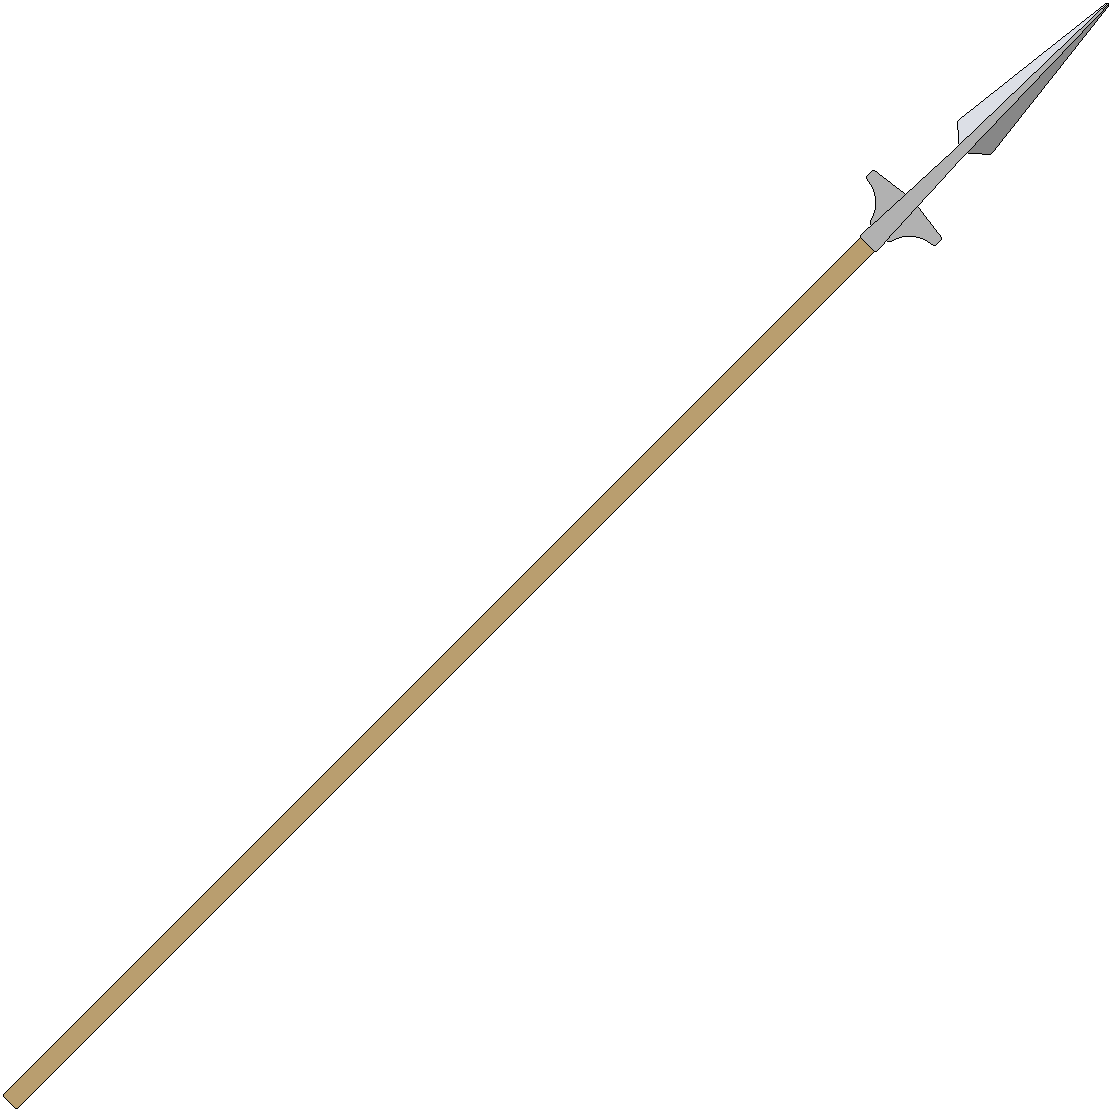 A Spear With A Pointed Tip